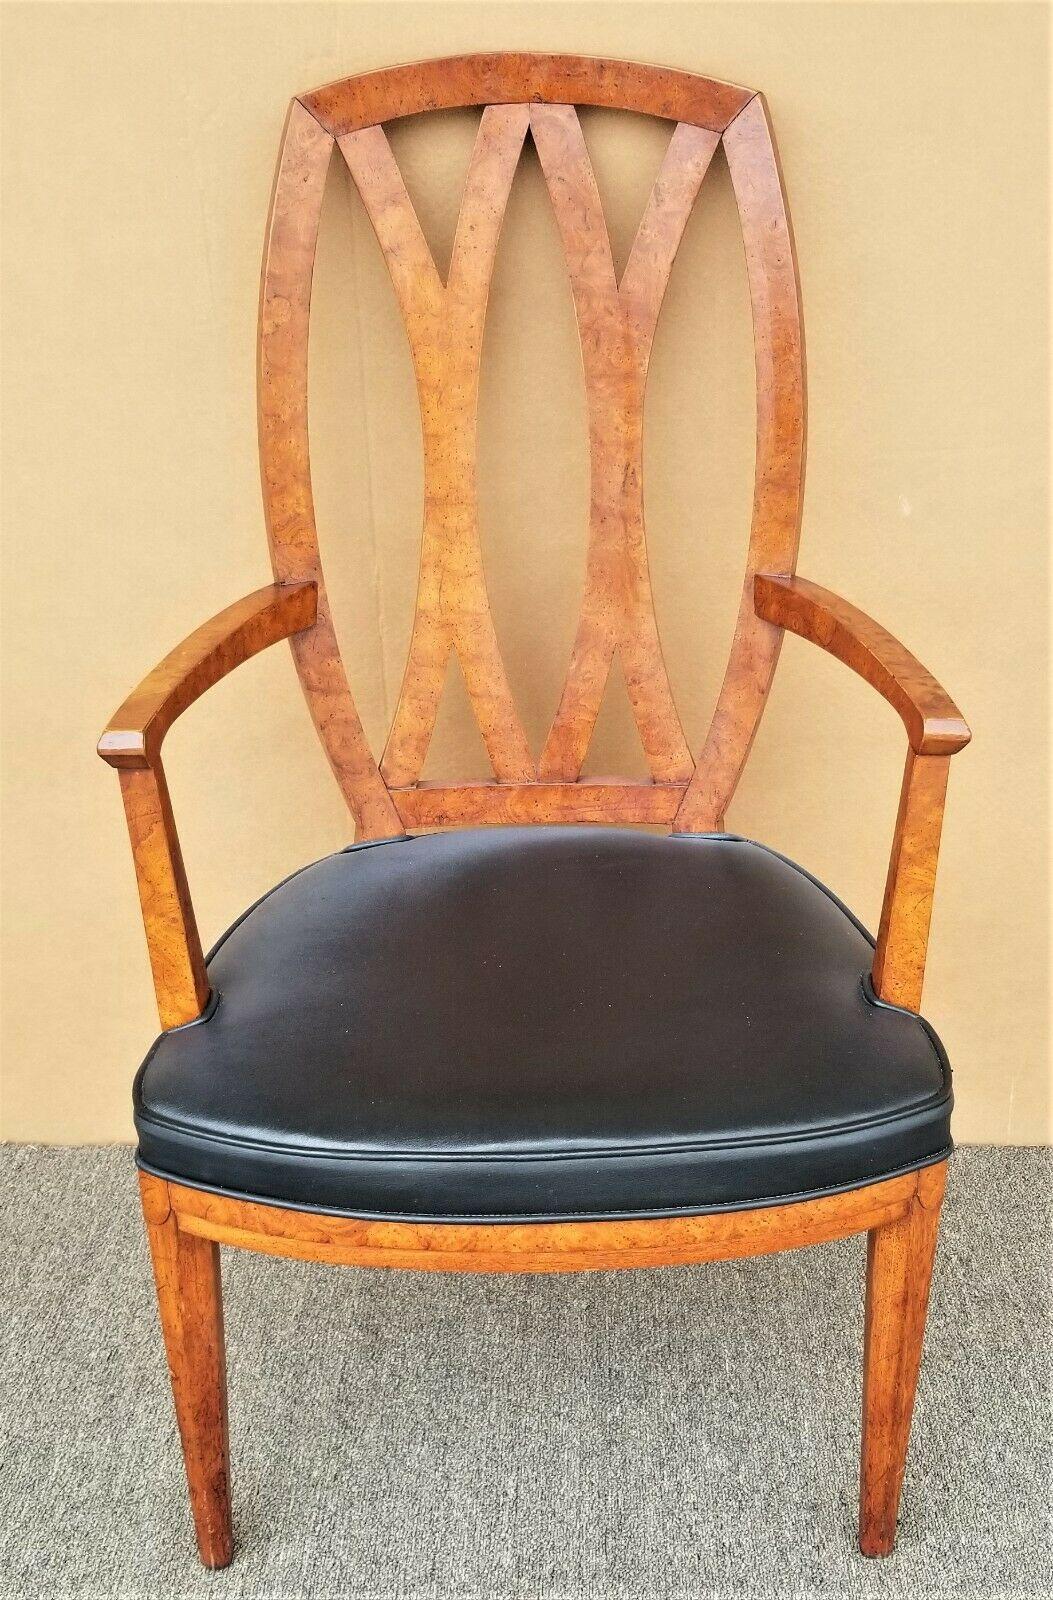 Offering one of our recent palm beach estate fine furniture acquisitions of a 
Vintage Henredon burl wood pretzel back armchair dining desk chair

Approximate measurements in inches
40.75